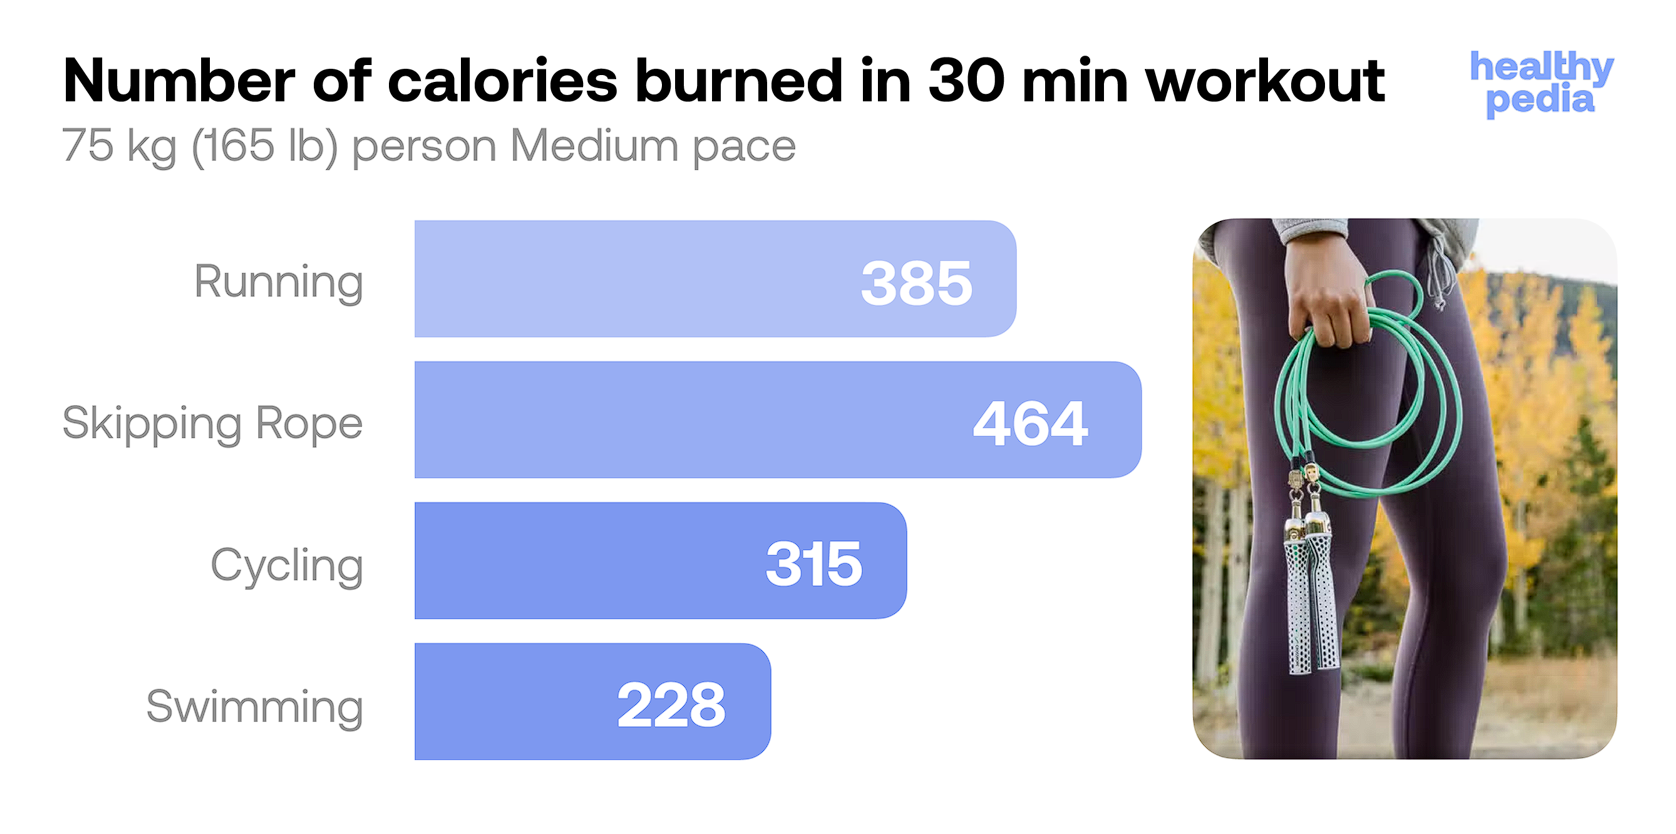 Number of calories burned in 30 min workout, stats